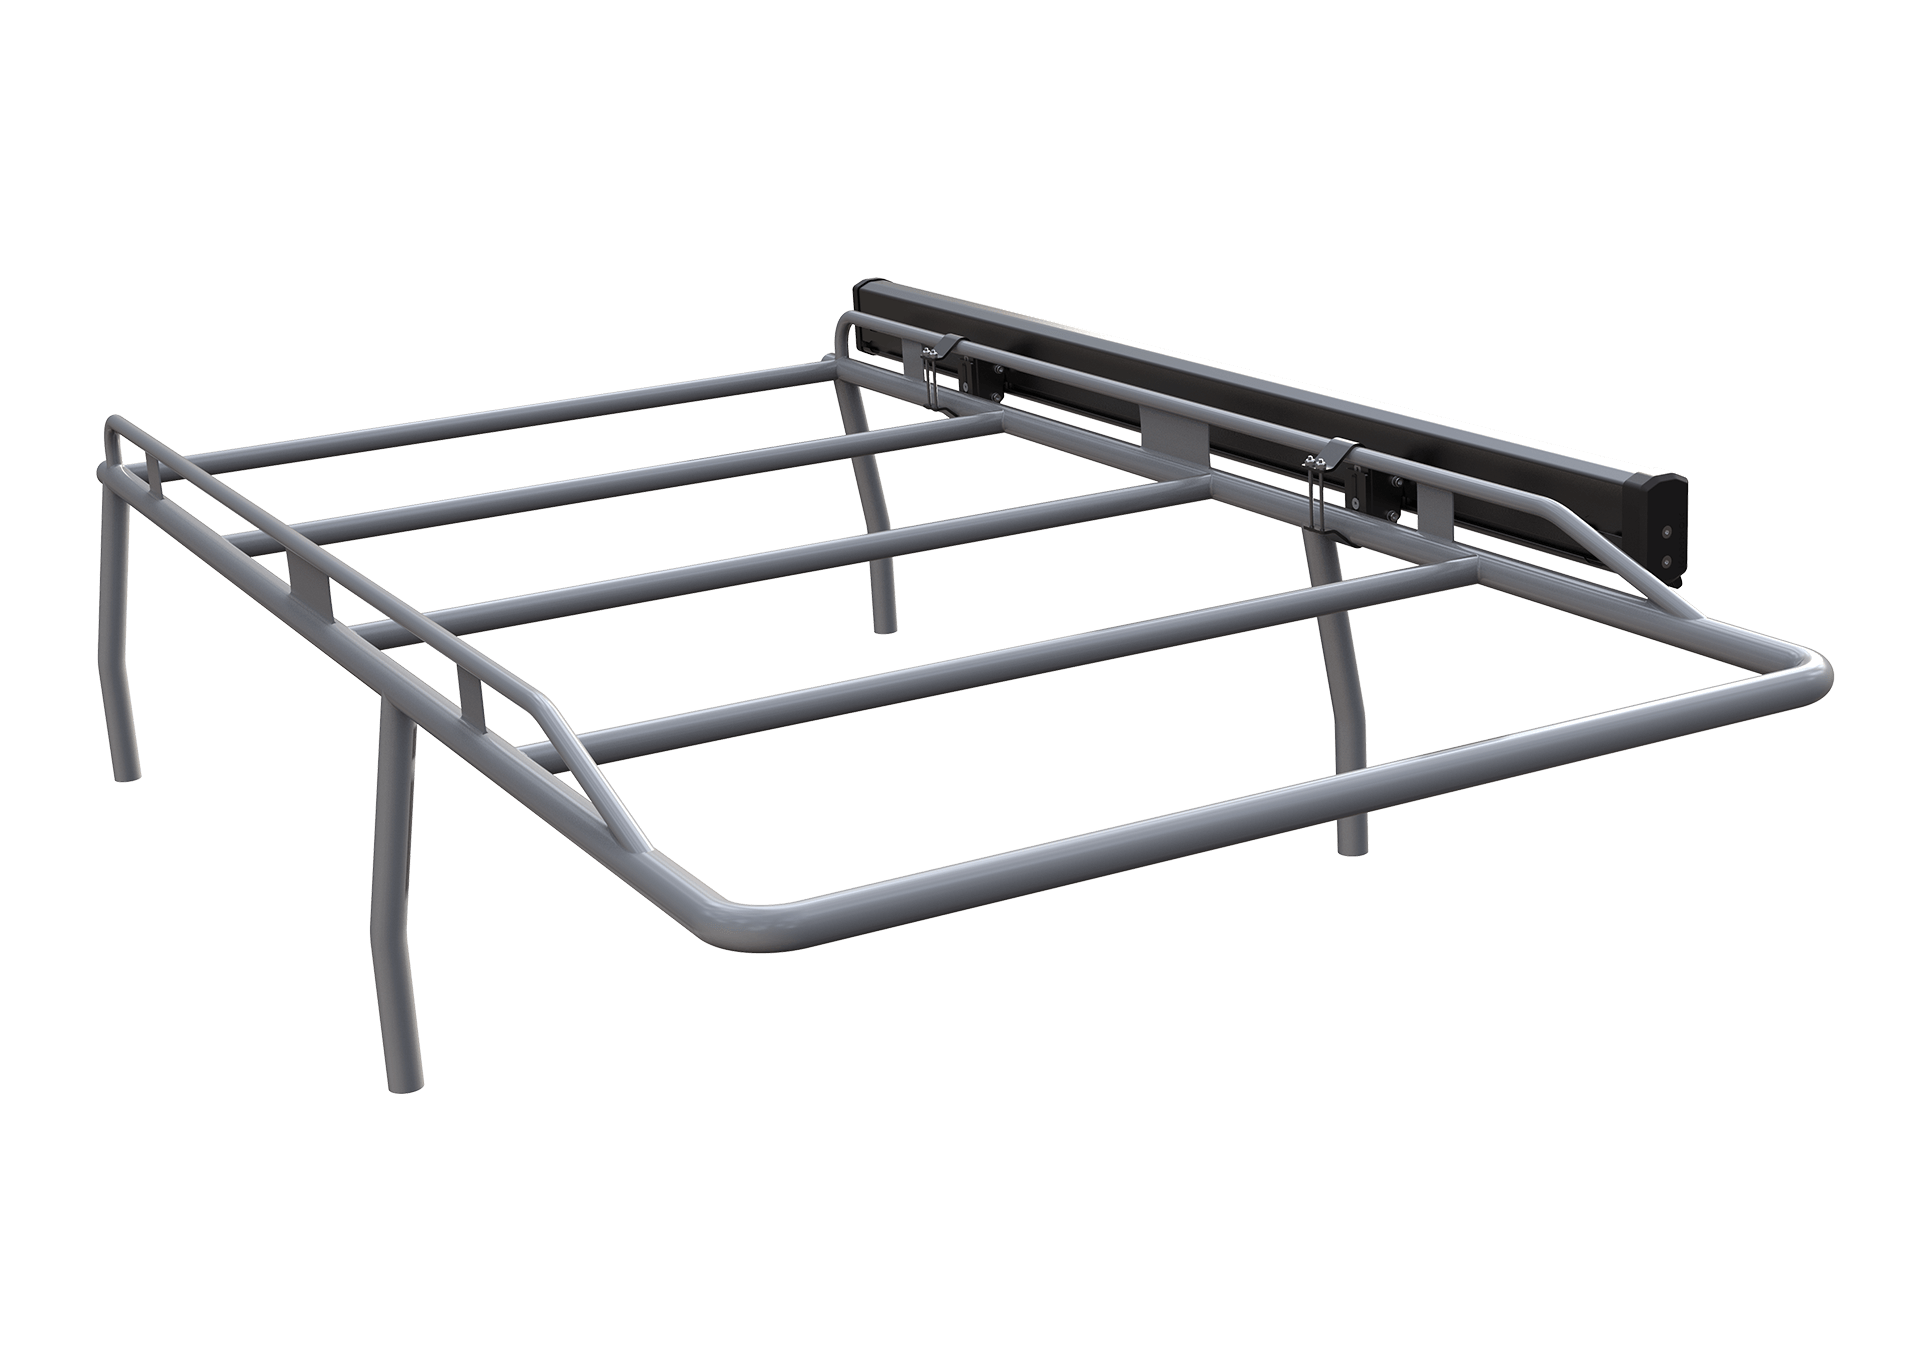 Clamp to baskets and racks with two horizontal parallel bars.